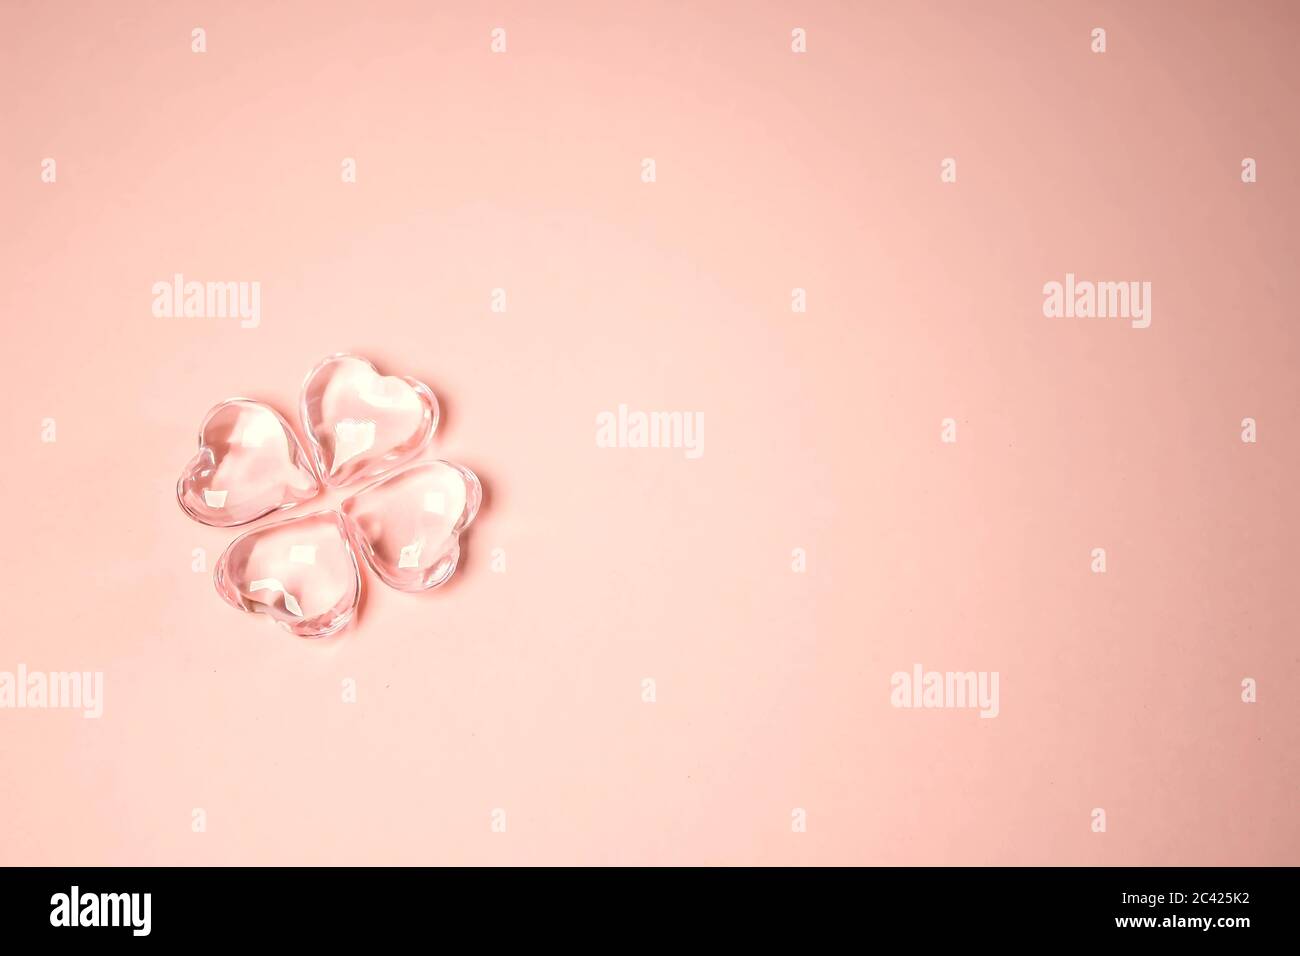 Imitation of a Lucky four leaf clover with four glass hearts on a pink background for St. Patricks Day. Space for text, digital texture design concept Stock Photo